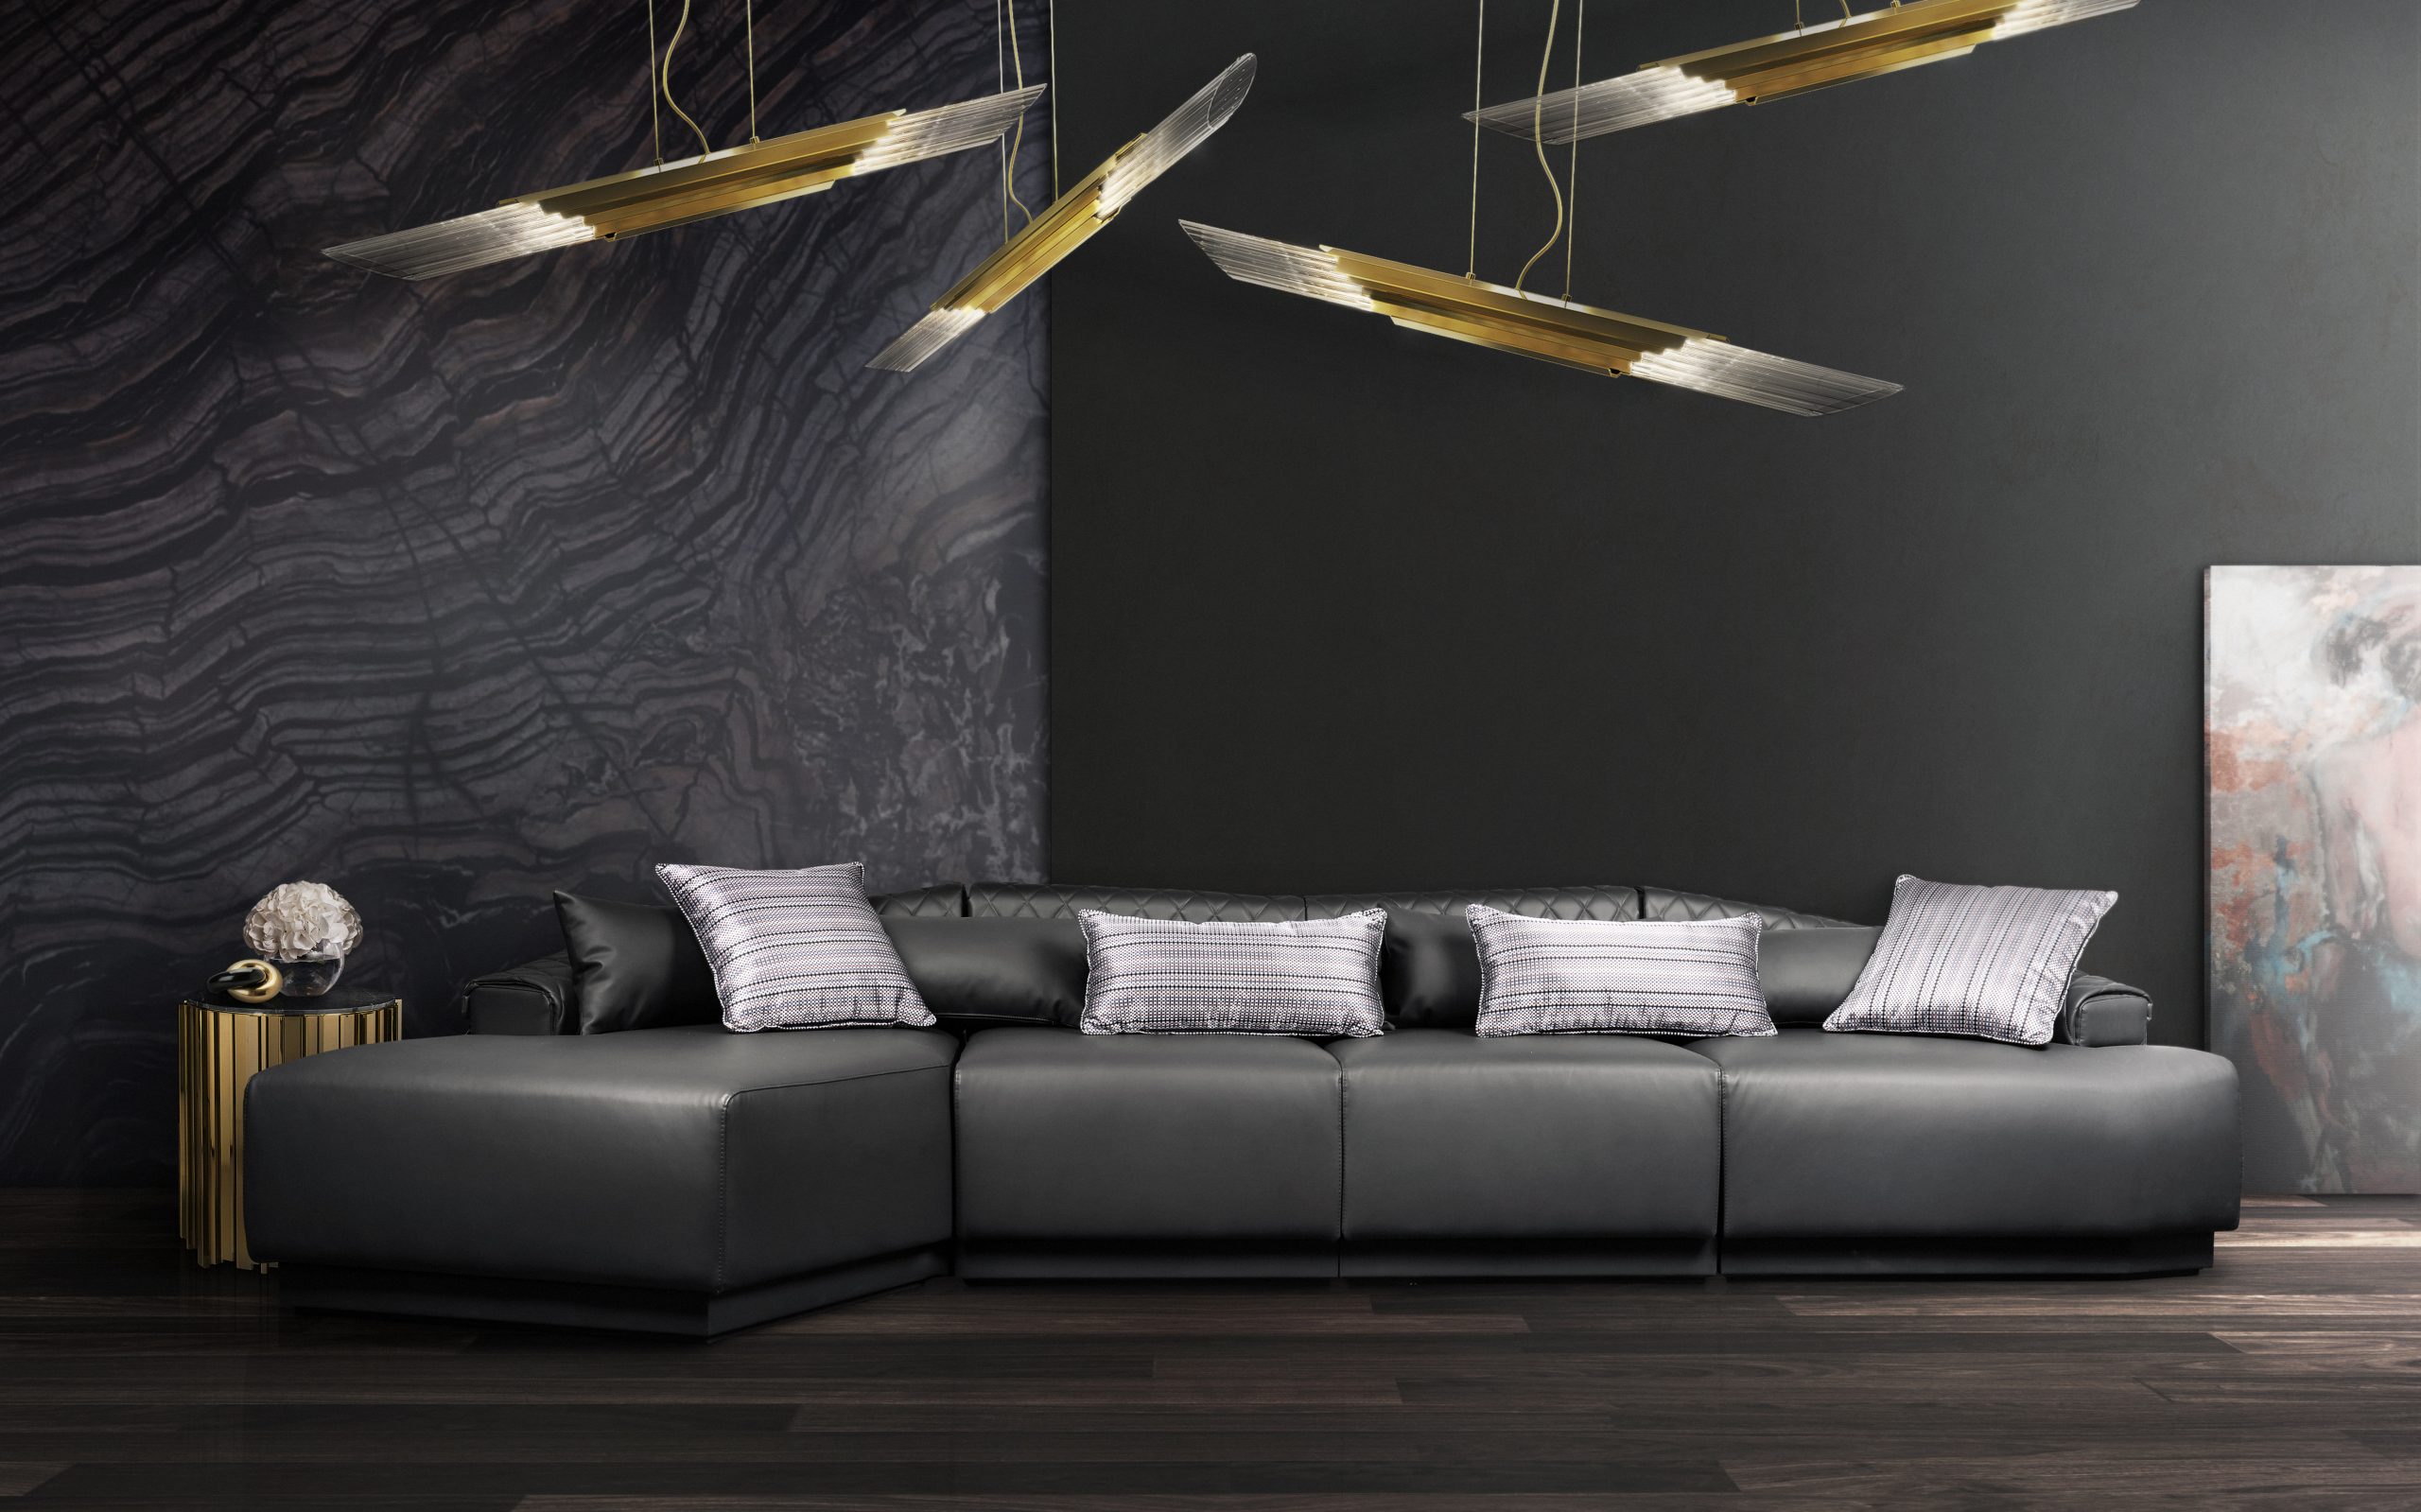 LUXXU's Sofa Collection: Discover Our Premium Upholstery Items